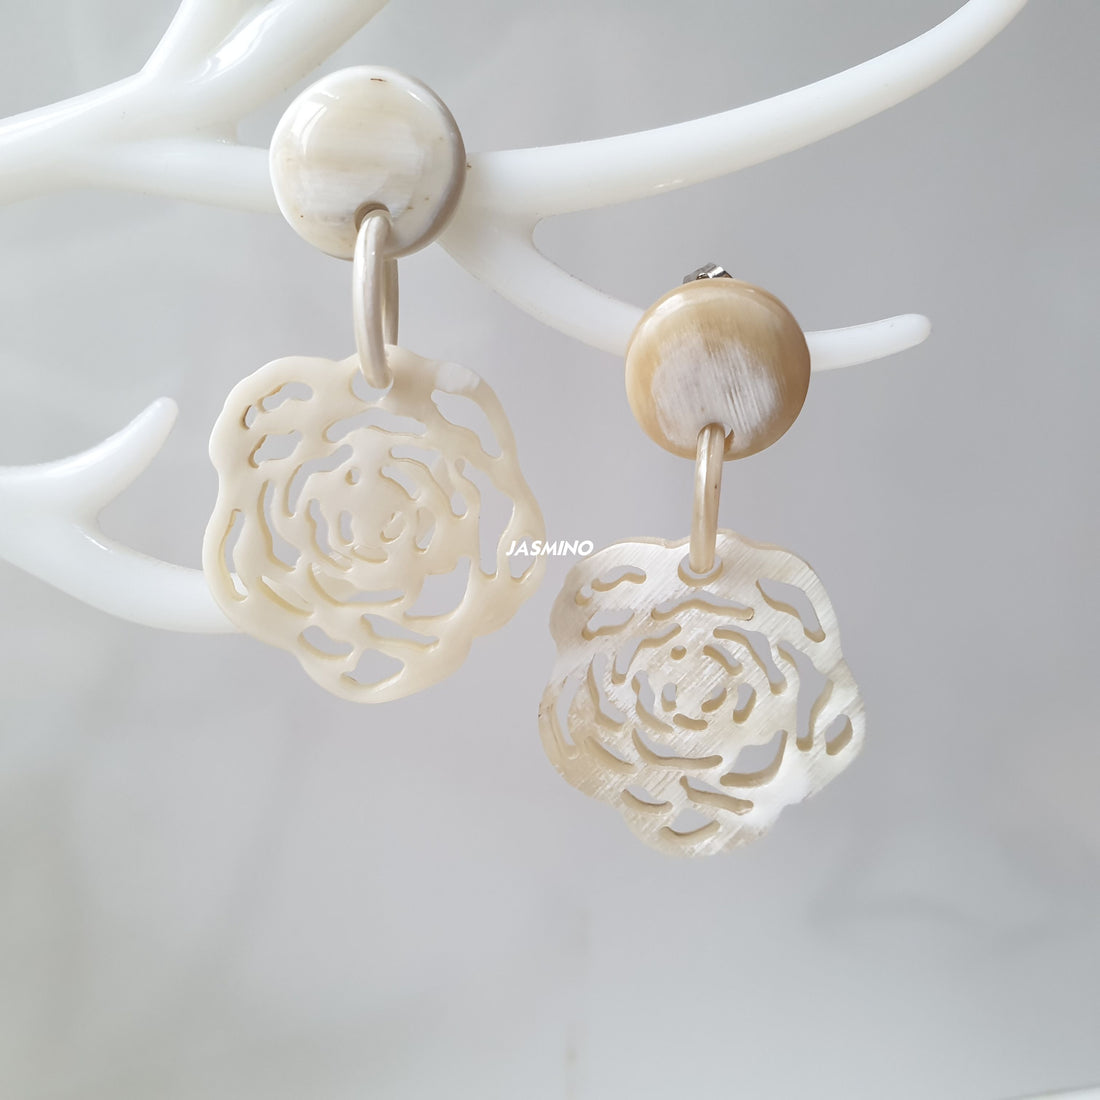 handmade drop earrings feature white and floral shape in natural buffalo horn for Spring 2023